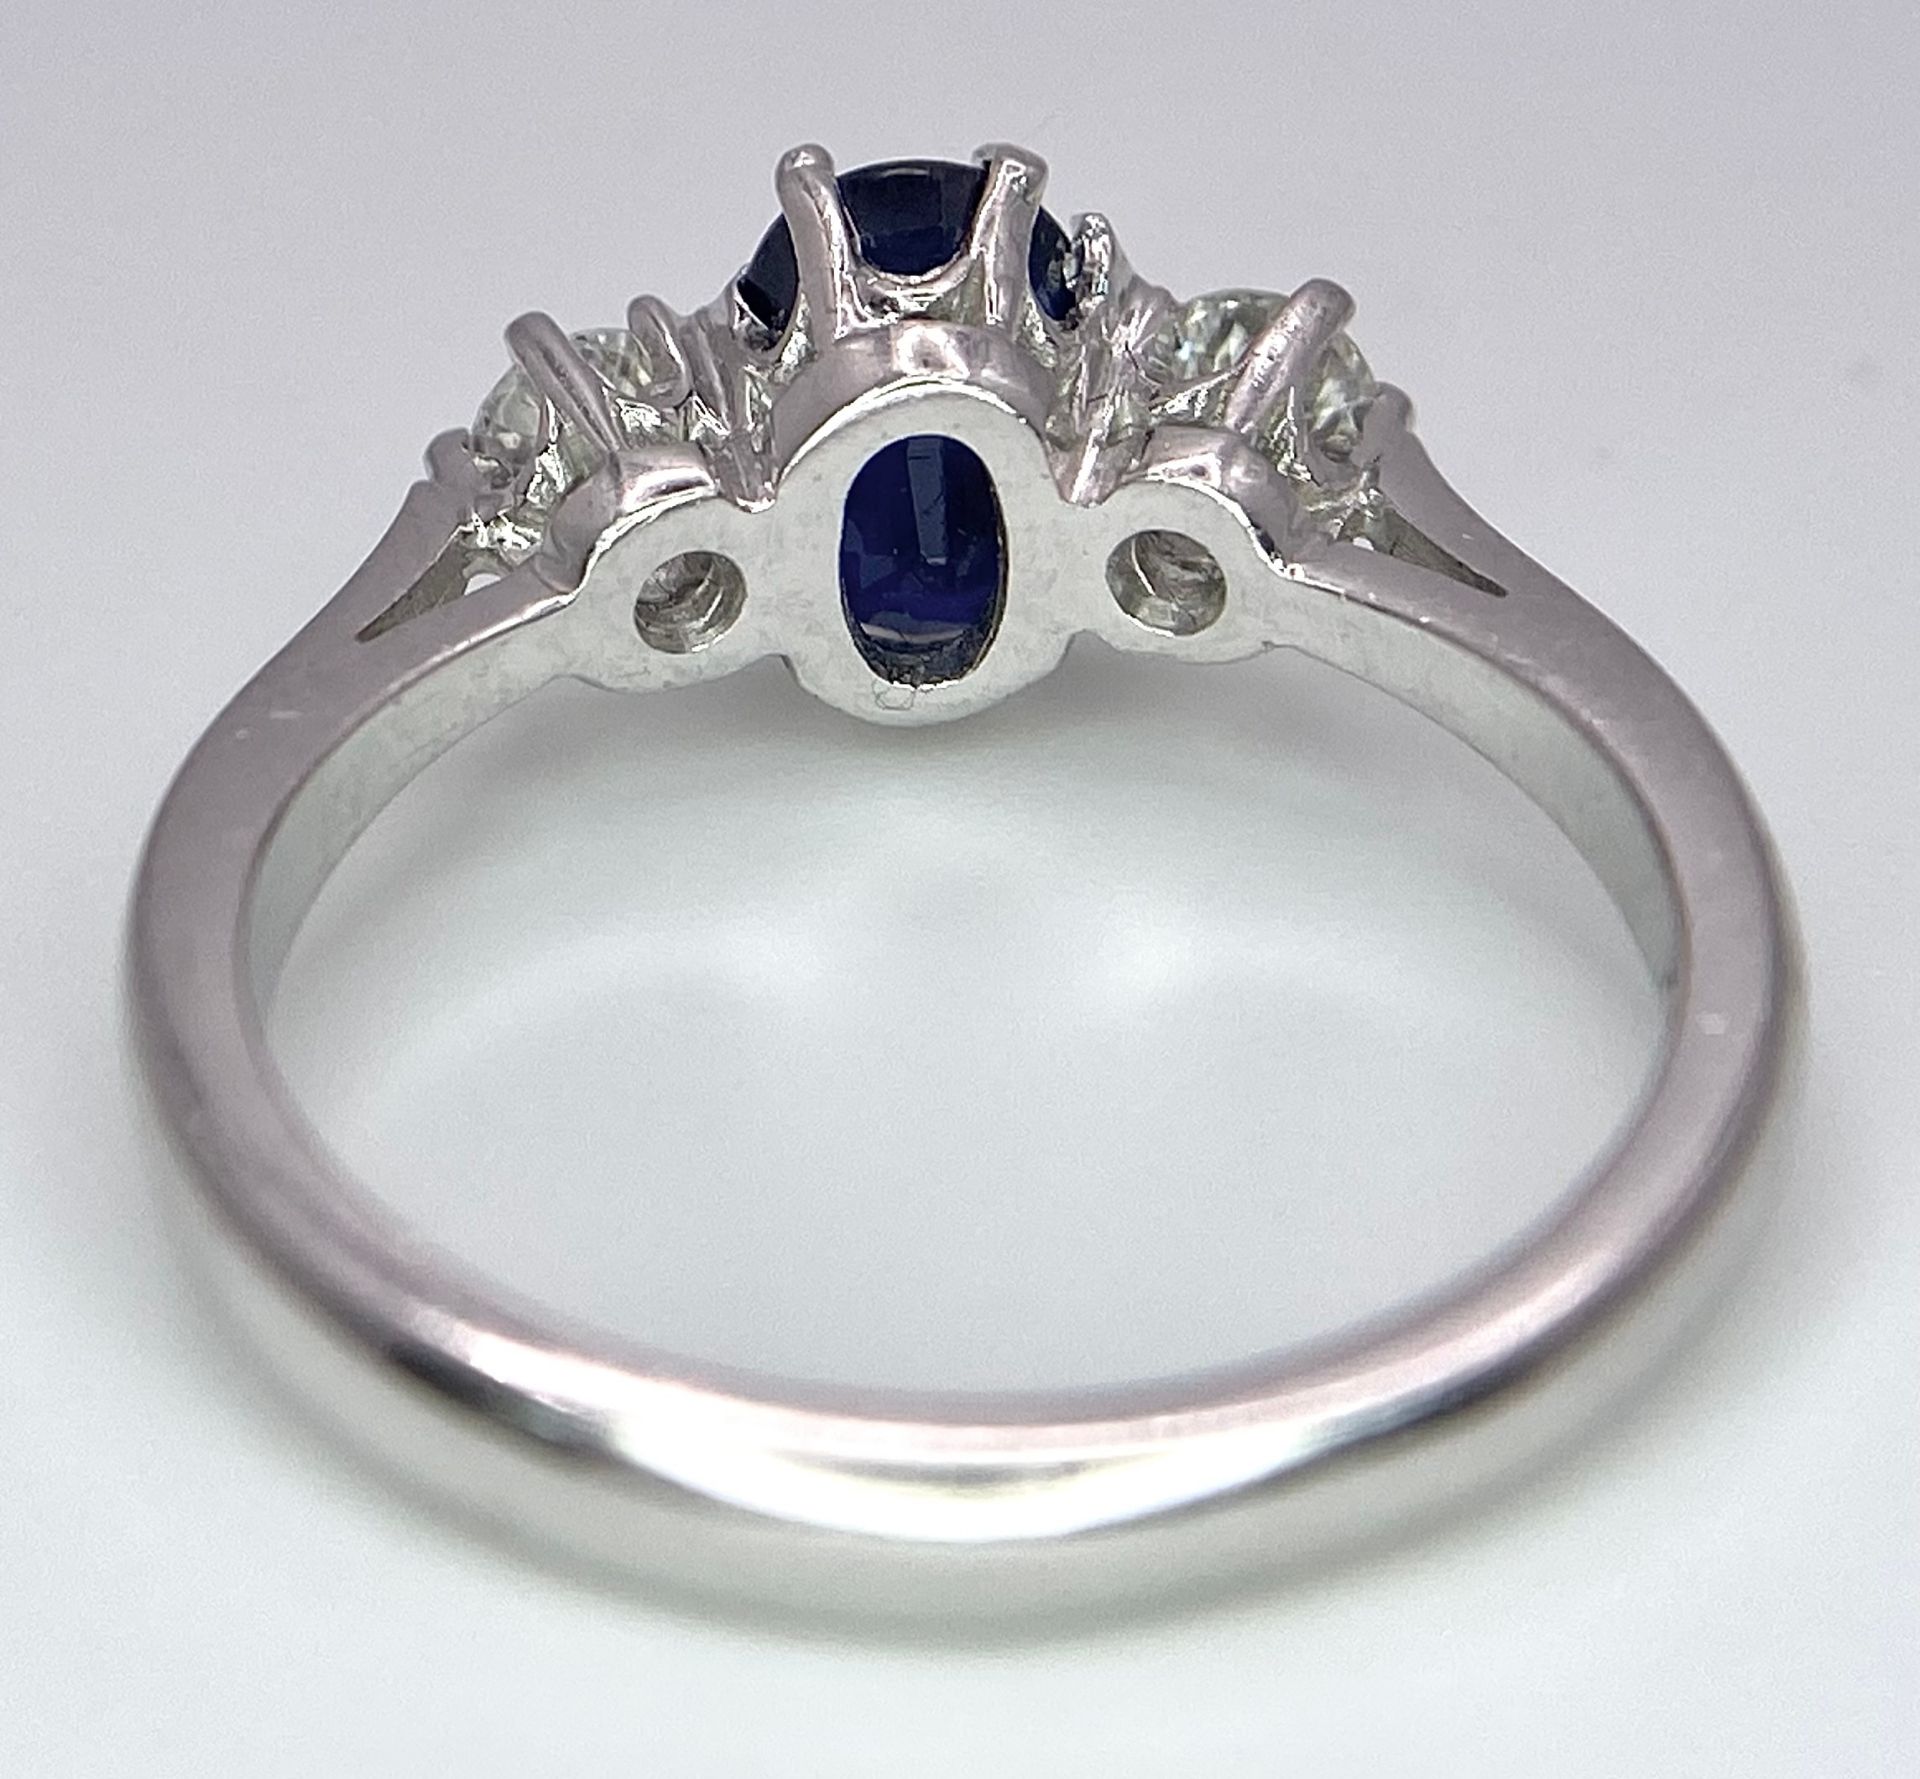 AN 18K WHITE GOLD, DIAMOND AND SAPPHIRE 3 STONE RING. OVAL BLUE SAPPHIRE - 0.75CT AND 0.30CT OF - Image 5 of 6